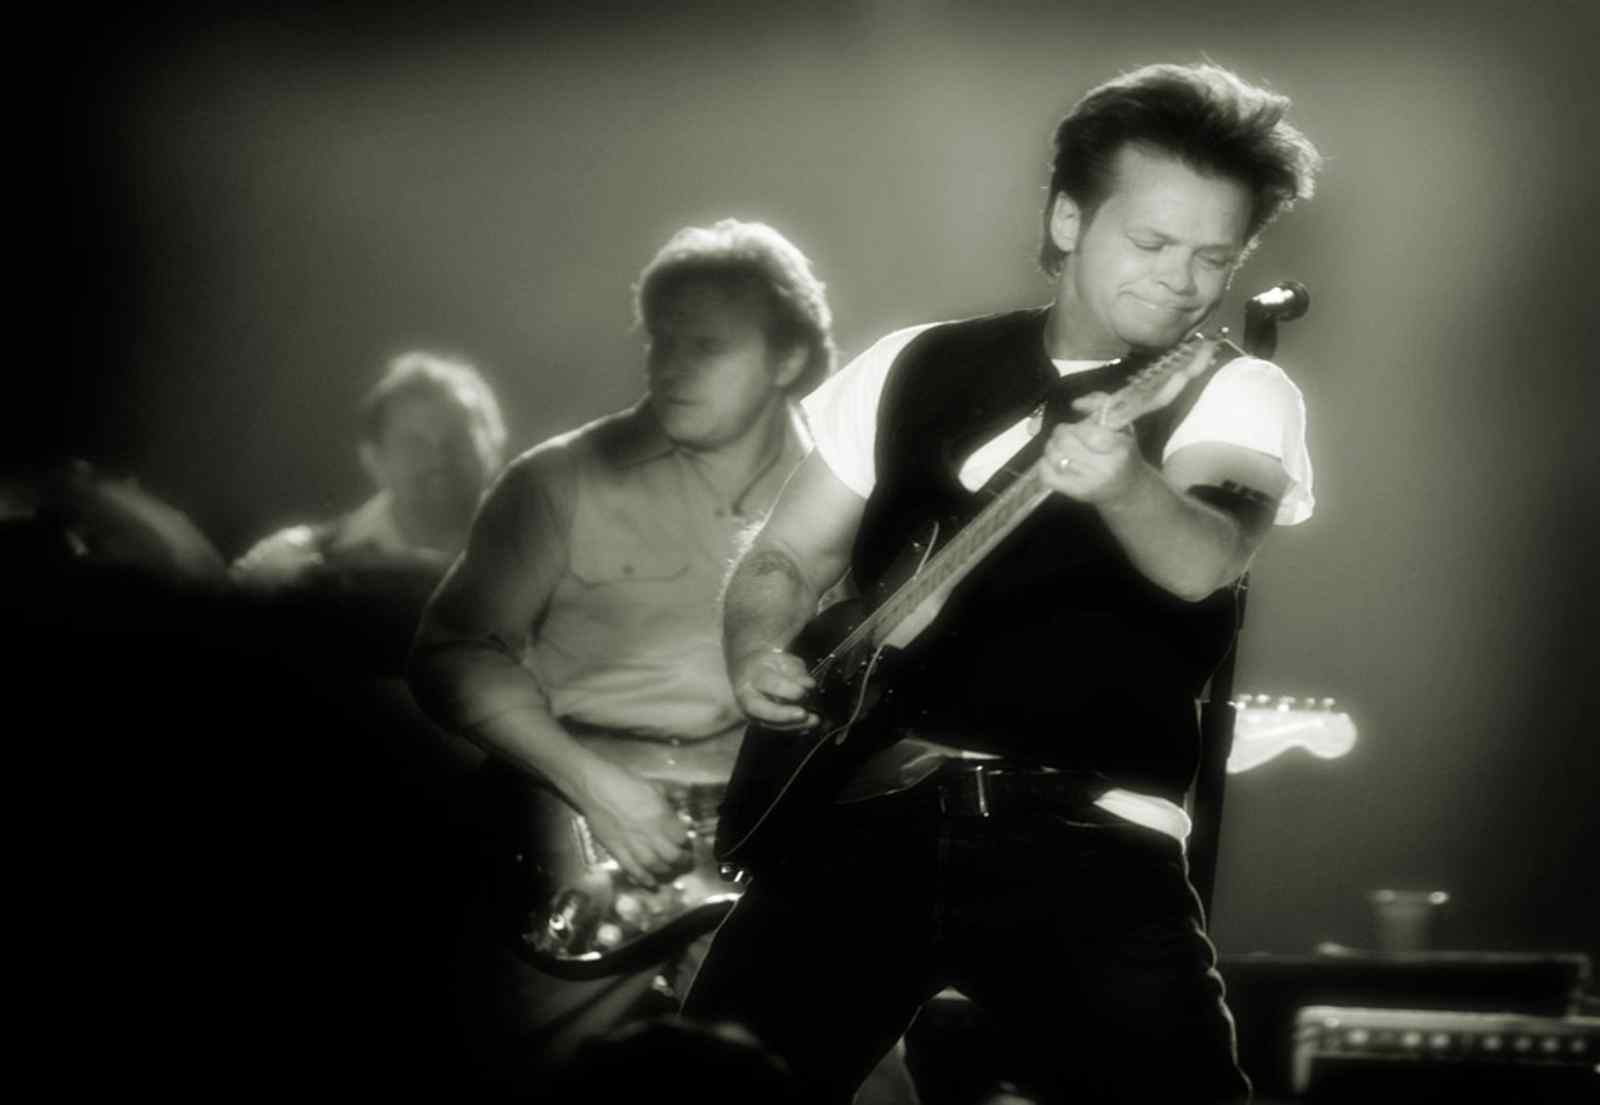 Fourth New York Beacon Theater Show Added To The John Mellencamp Live And In Person 2023 Tour